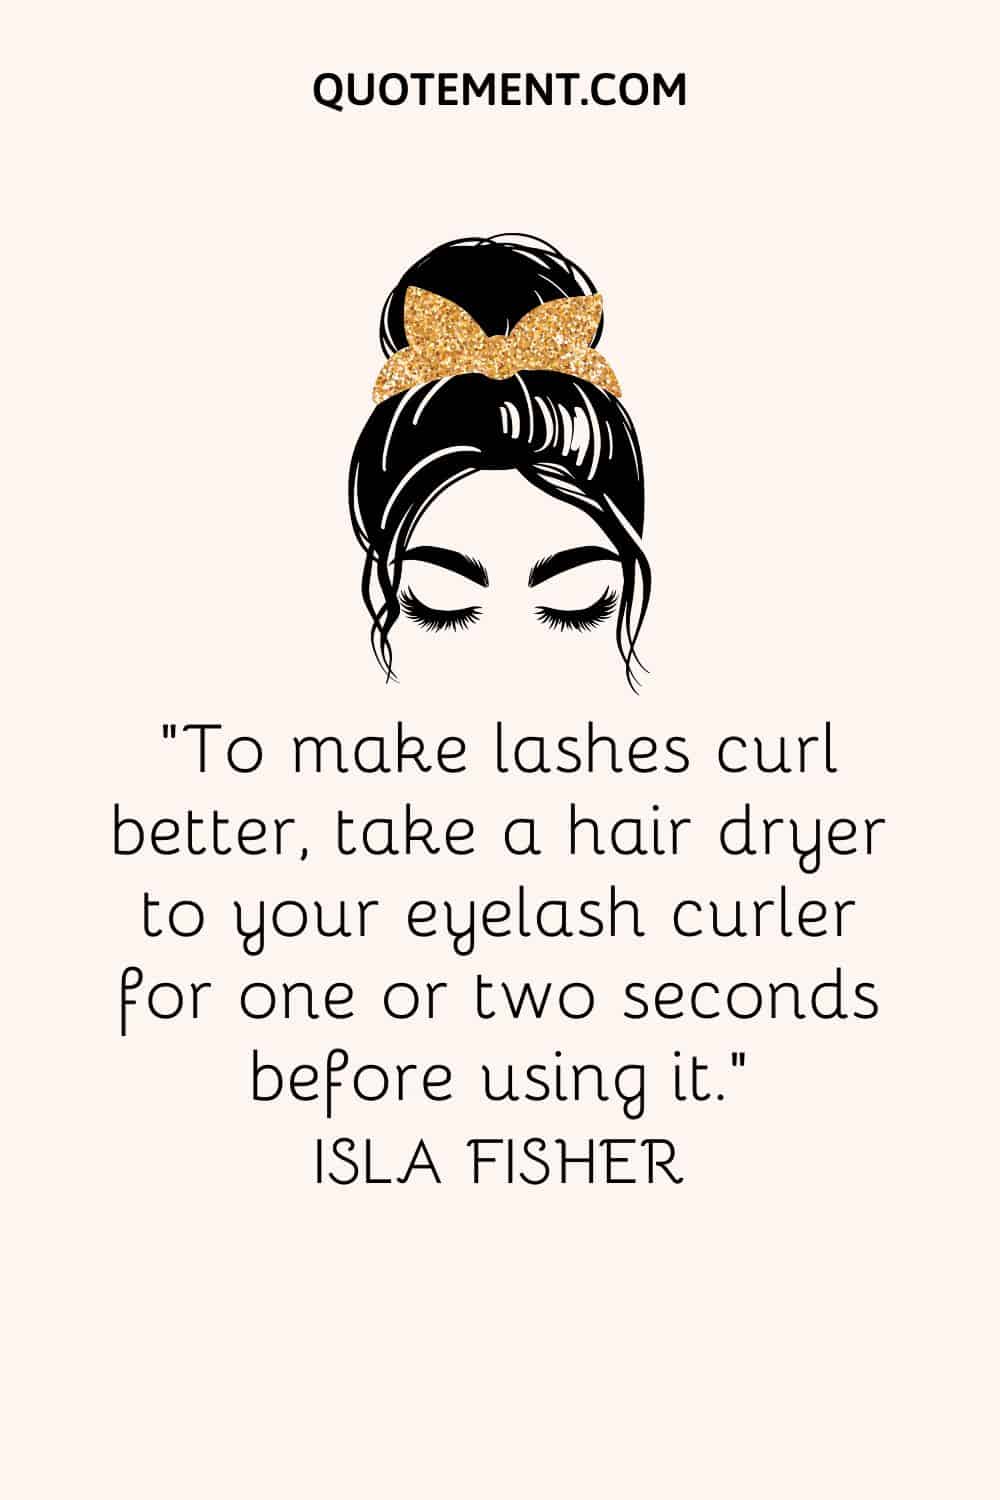 To make lashes curl better, take a hair dryer to your eyelash curler for one or two seconds before using it